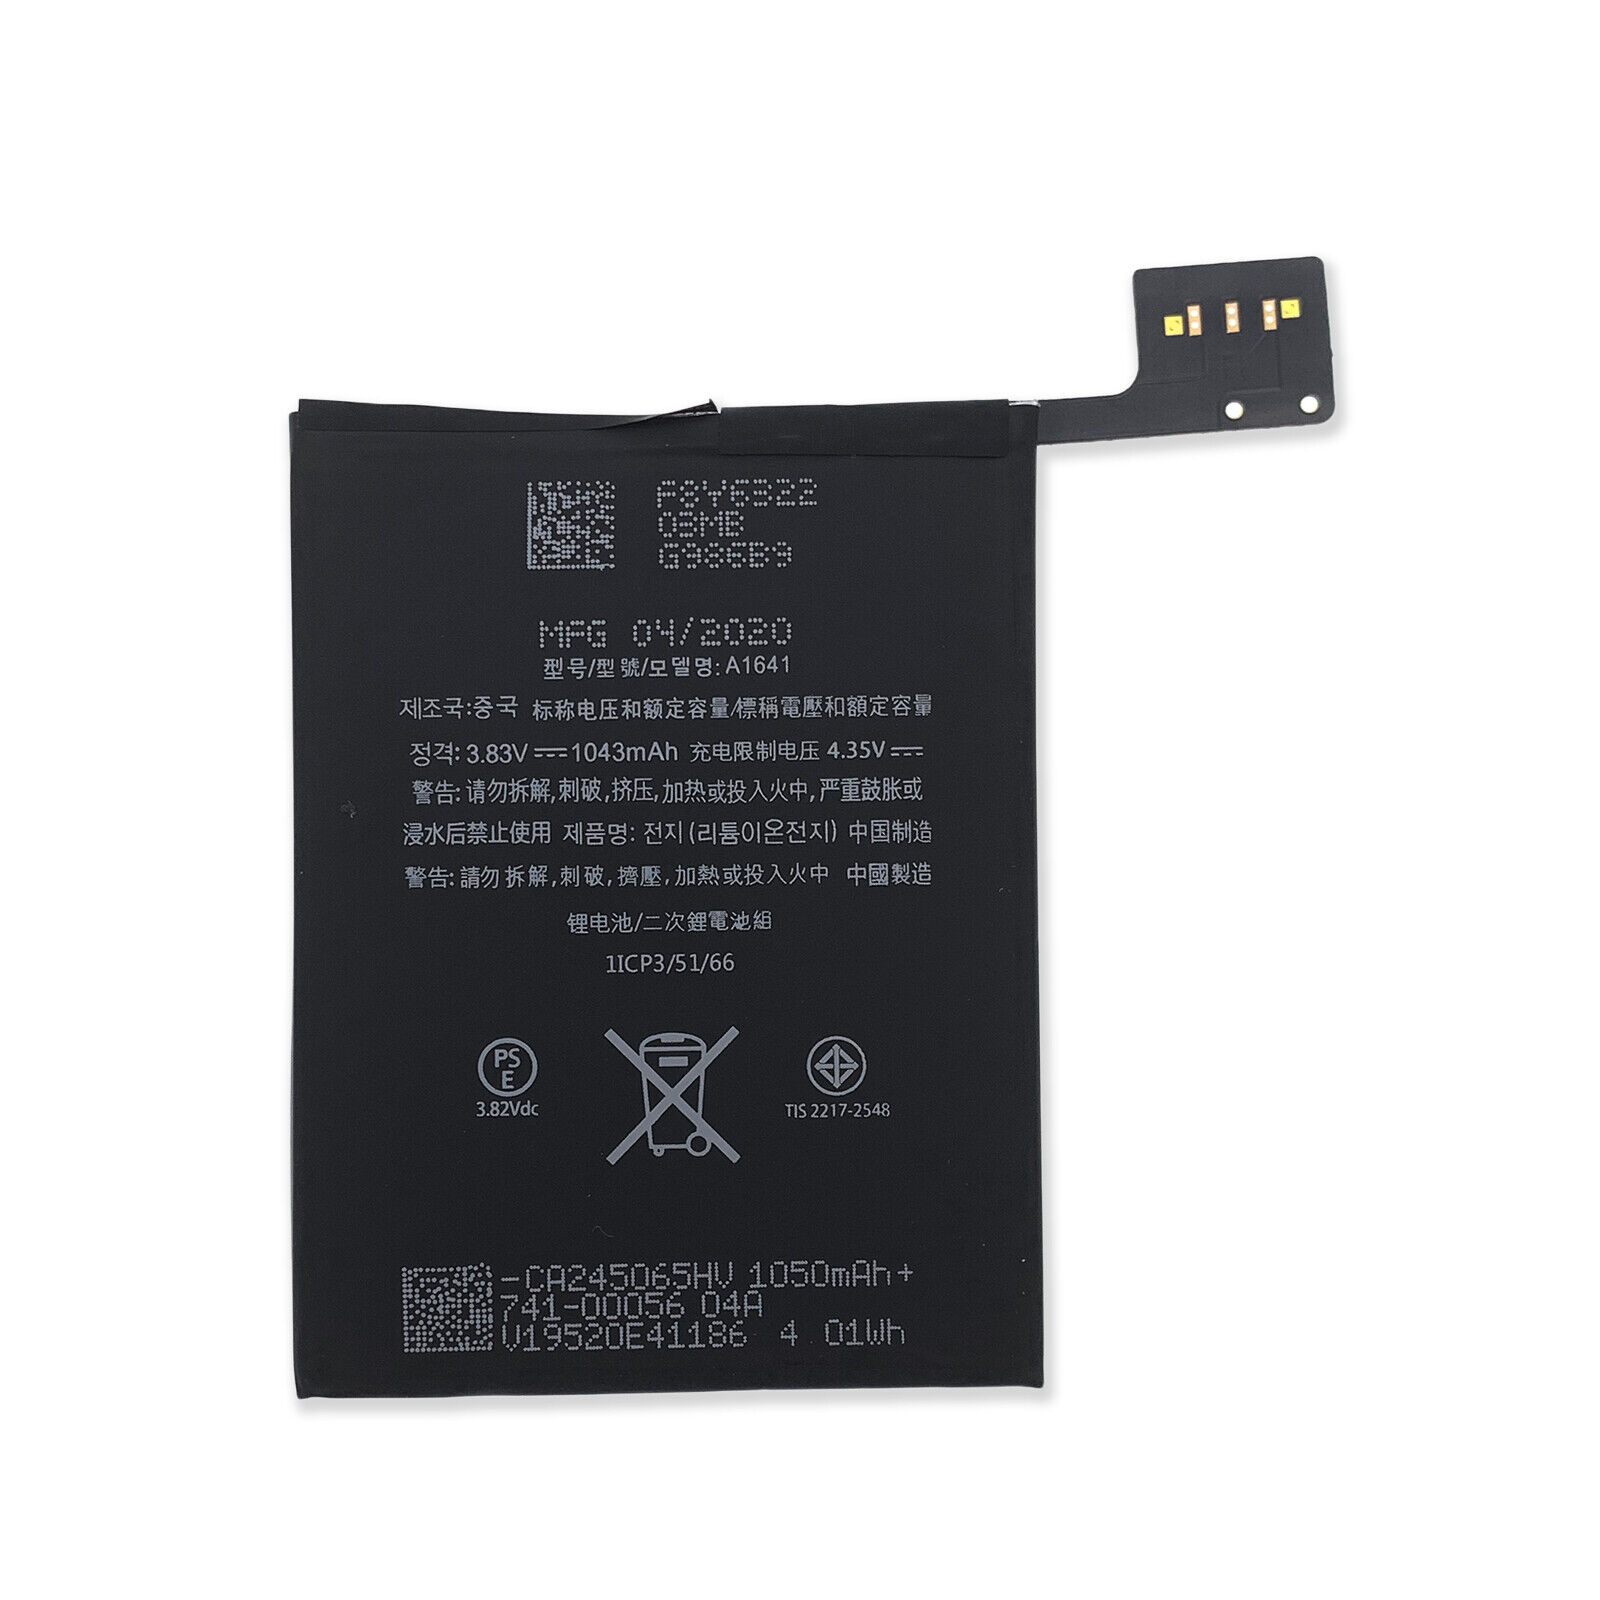 4X 616-0619 616-0621 Battery for iPod Touch 5 5th Gen A1421 A1509 16GB 32GB 64GB Unbranded Does Not Apply - фотография #6